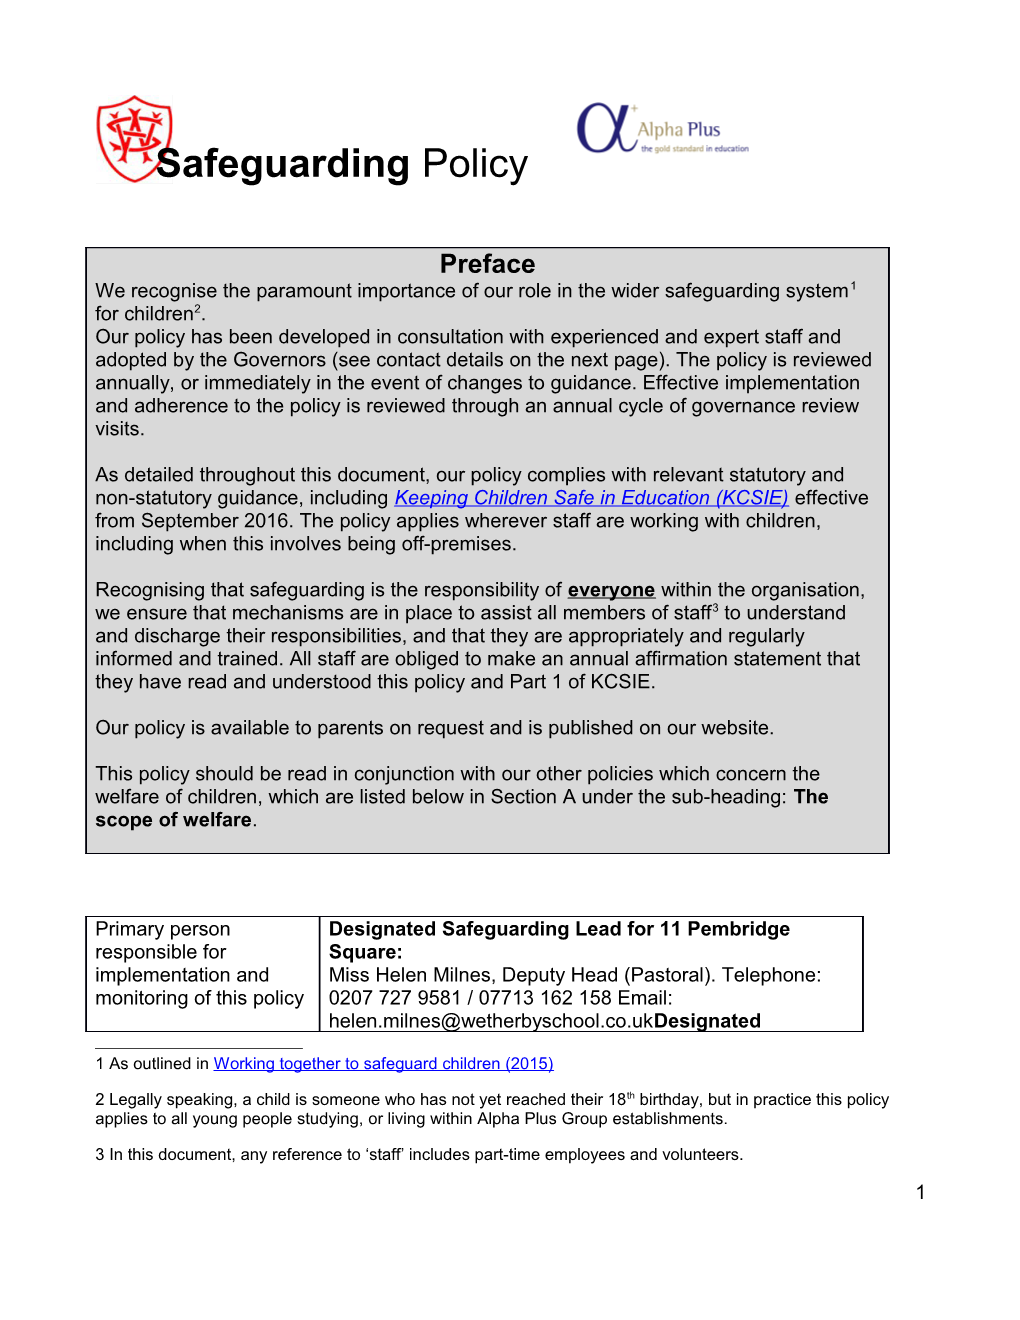 Safeguarding Policy Template 2016-17